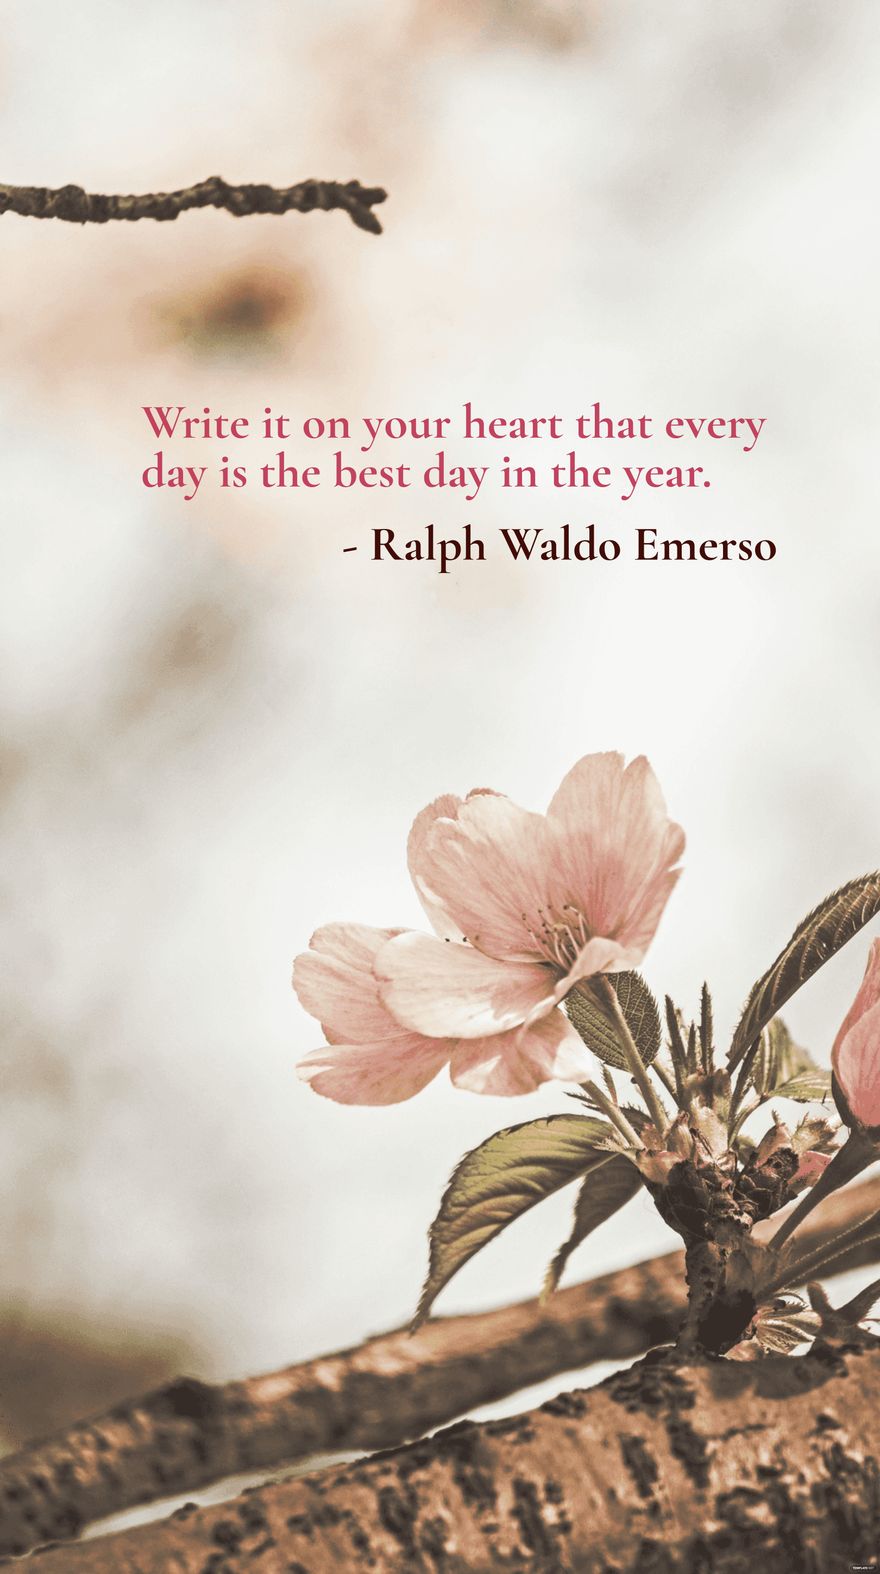 Free Write it on your heart that every day is the best day in the year. in JPEG